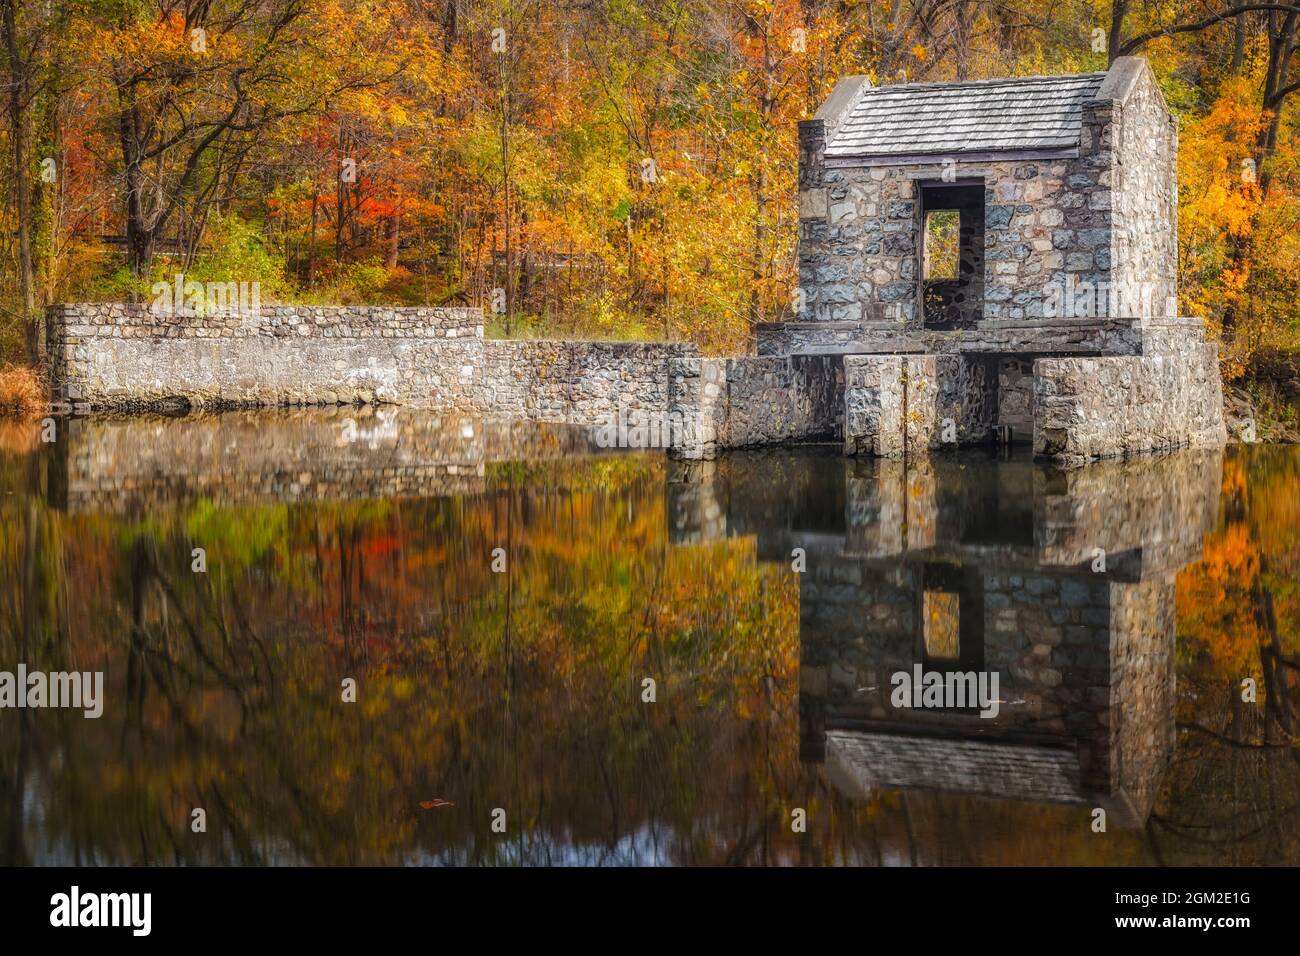 Speedwell Dam In Autumn - View to the stone structure on the Whippany River surround by the warm colors of the fall foliage.   This image is available Stock Photo